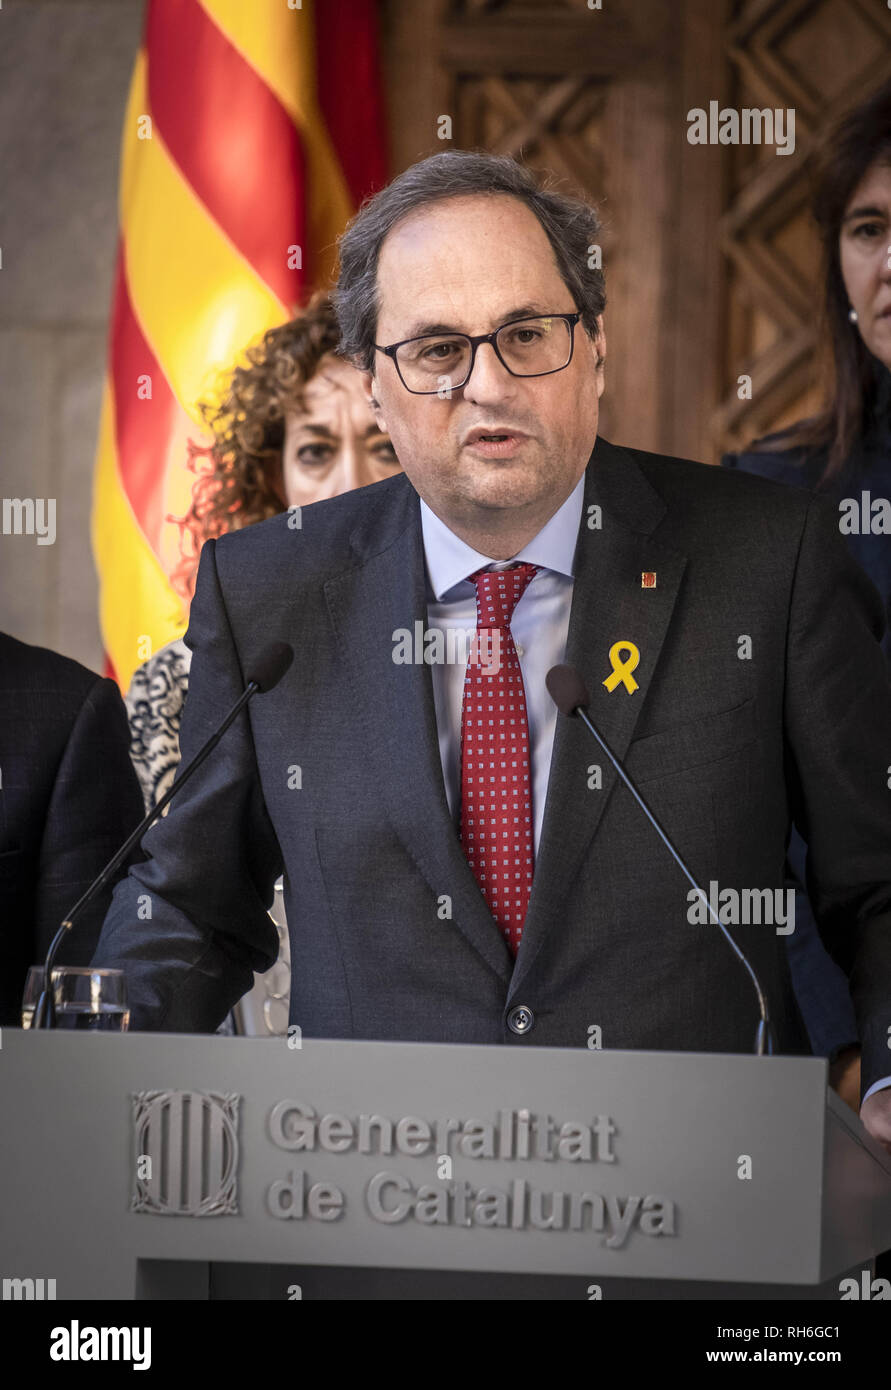 February 1, 2019 - Barcelona, Catalonia, Spain - President Quim Torra is seen during the institutional declaration of the transfer of political prisoners to Madrid to be tried..President Quim Torra during the declaration has asked the international community and all entities of civil and human rights to add to the sentiment of the people of Catalonia in defense of the principles and values of a fairer, safer and freer future world. (Credit Image: © Paco Freire/SOPA Images via ZUMA Wire) Stock Photo